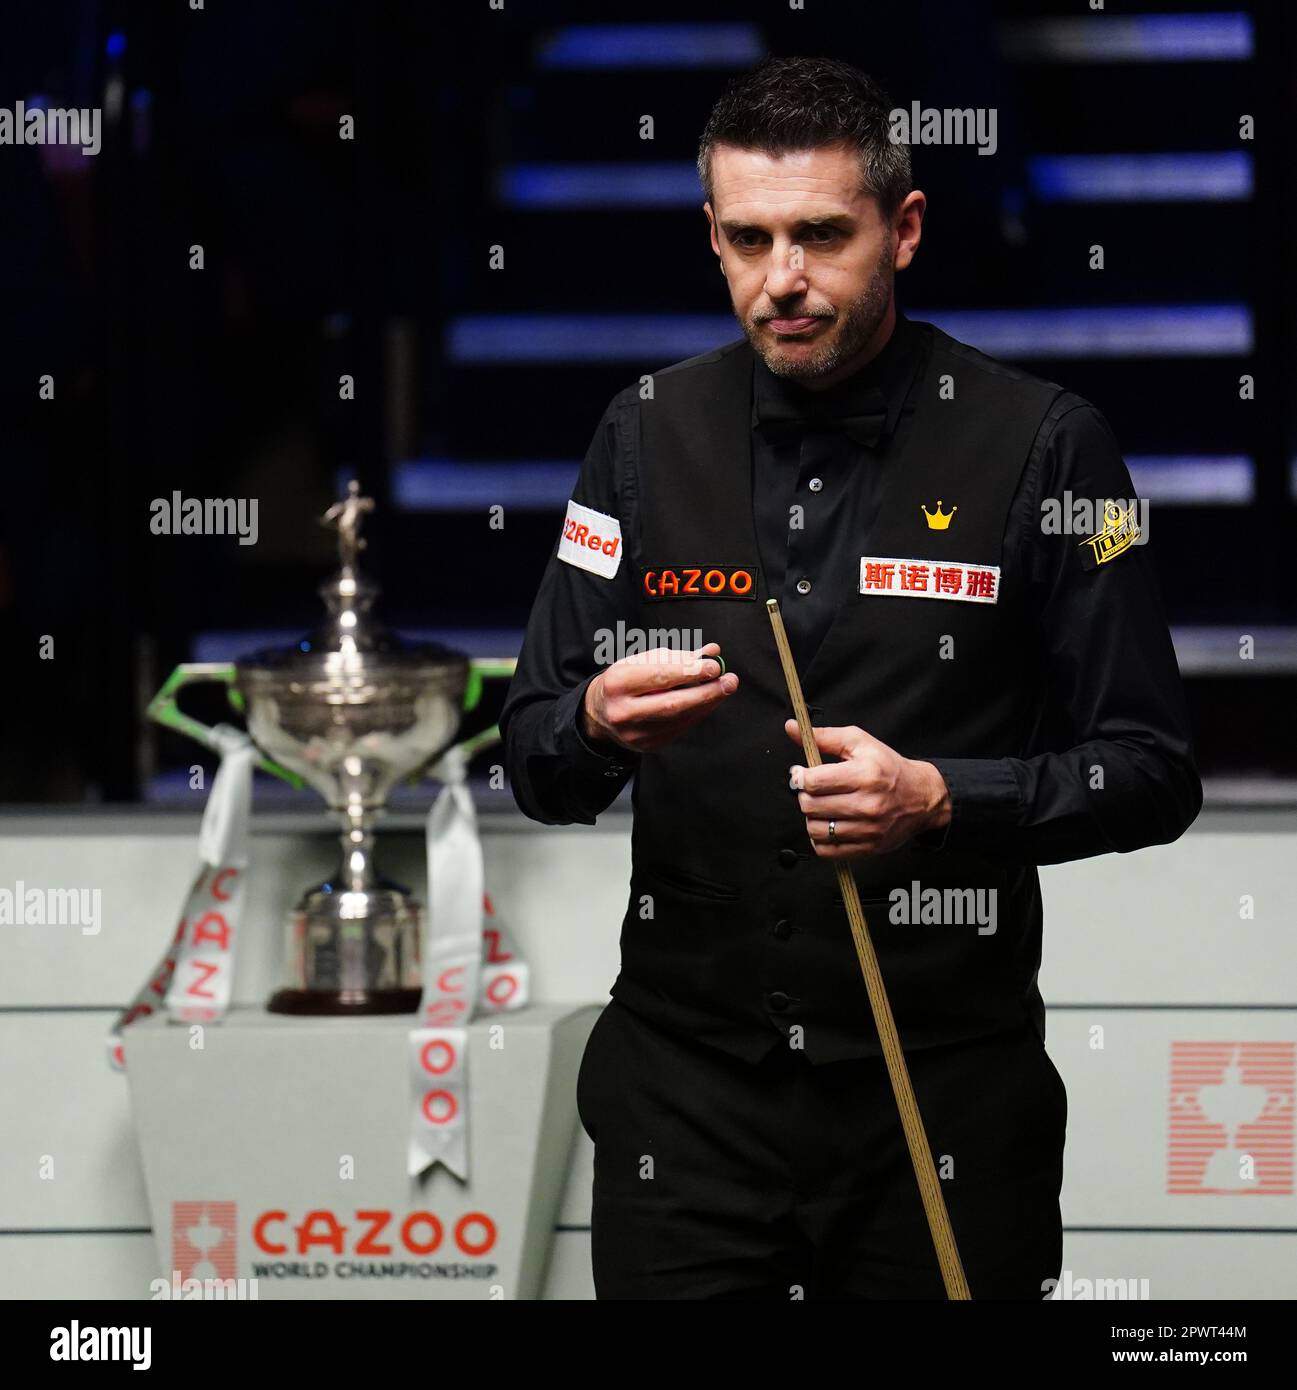 Mark Selby in action against Luca Brecel (not pictured) during the final on day seventeen of the Cazoo World Snooker Championship at the Crucible Theatre, Sheffield